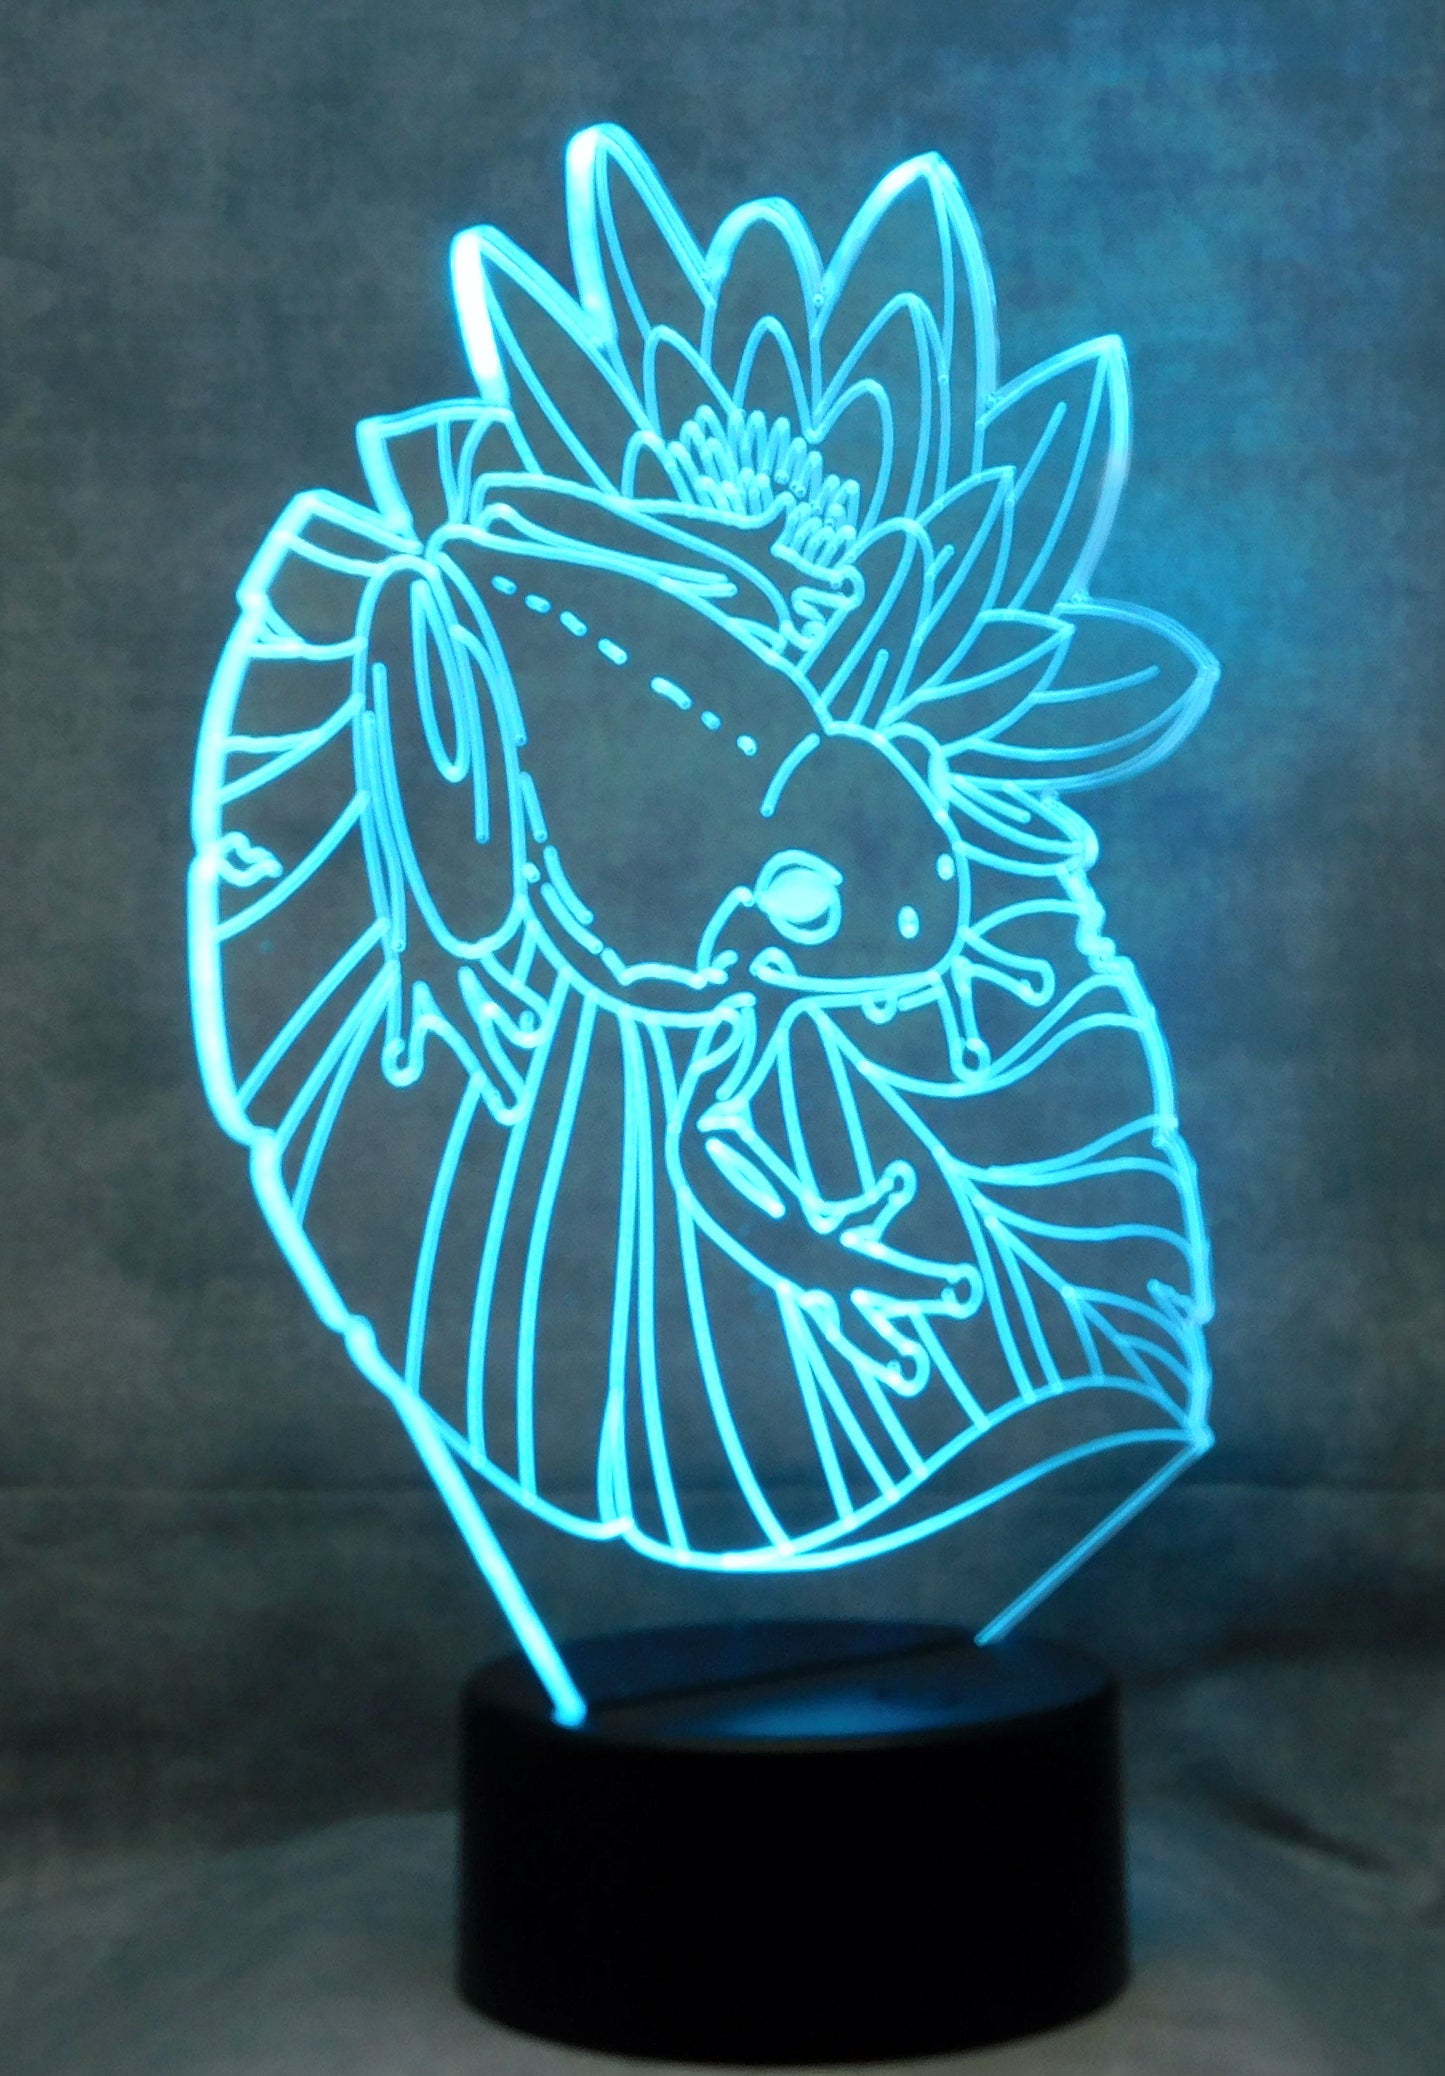 Frog on Lotus Flower 3-D Optical Illusion Multicolored Lamp